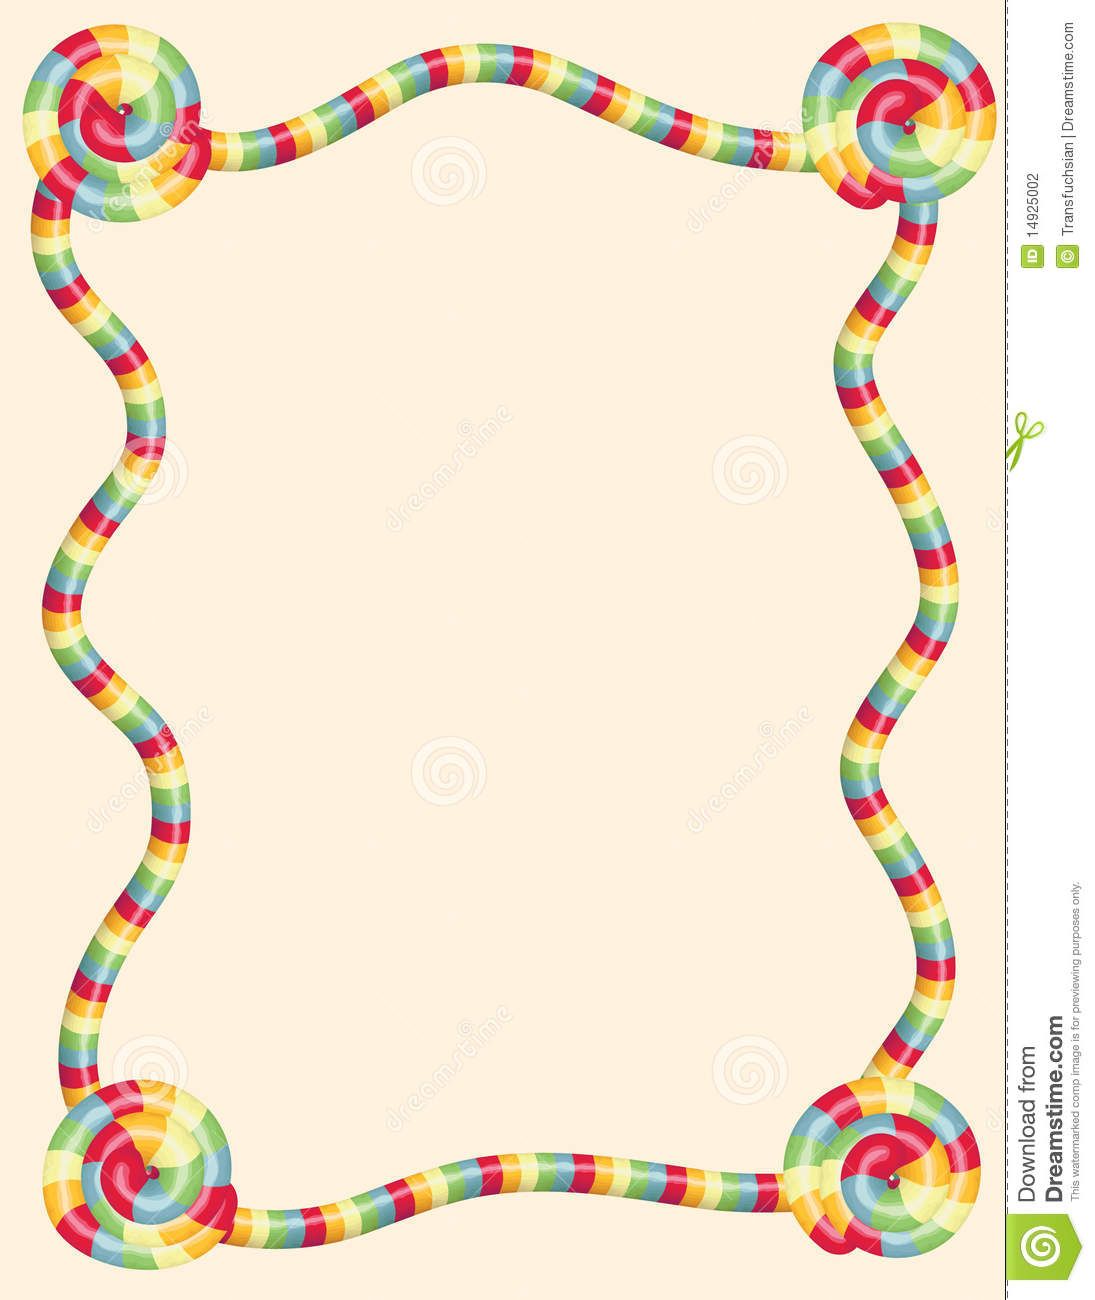 Candyland clipart border. Free download for your